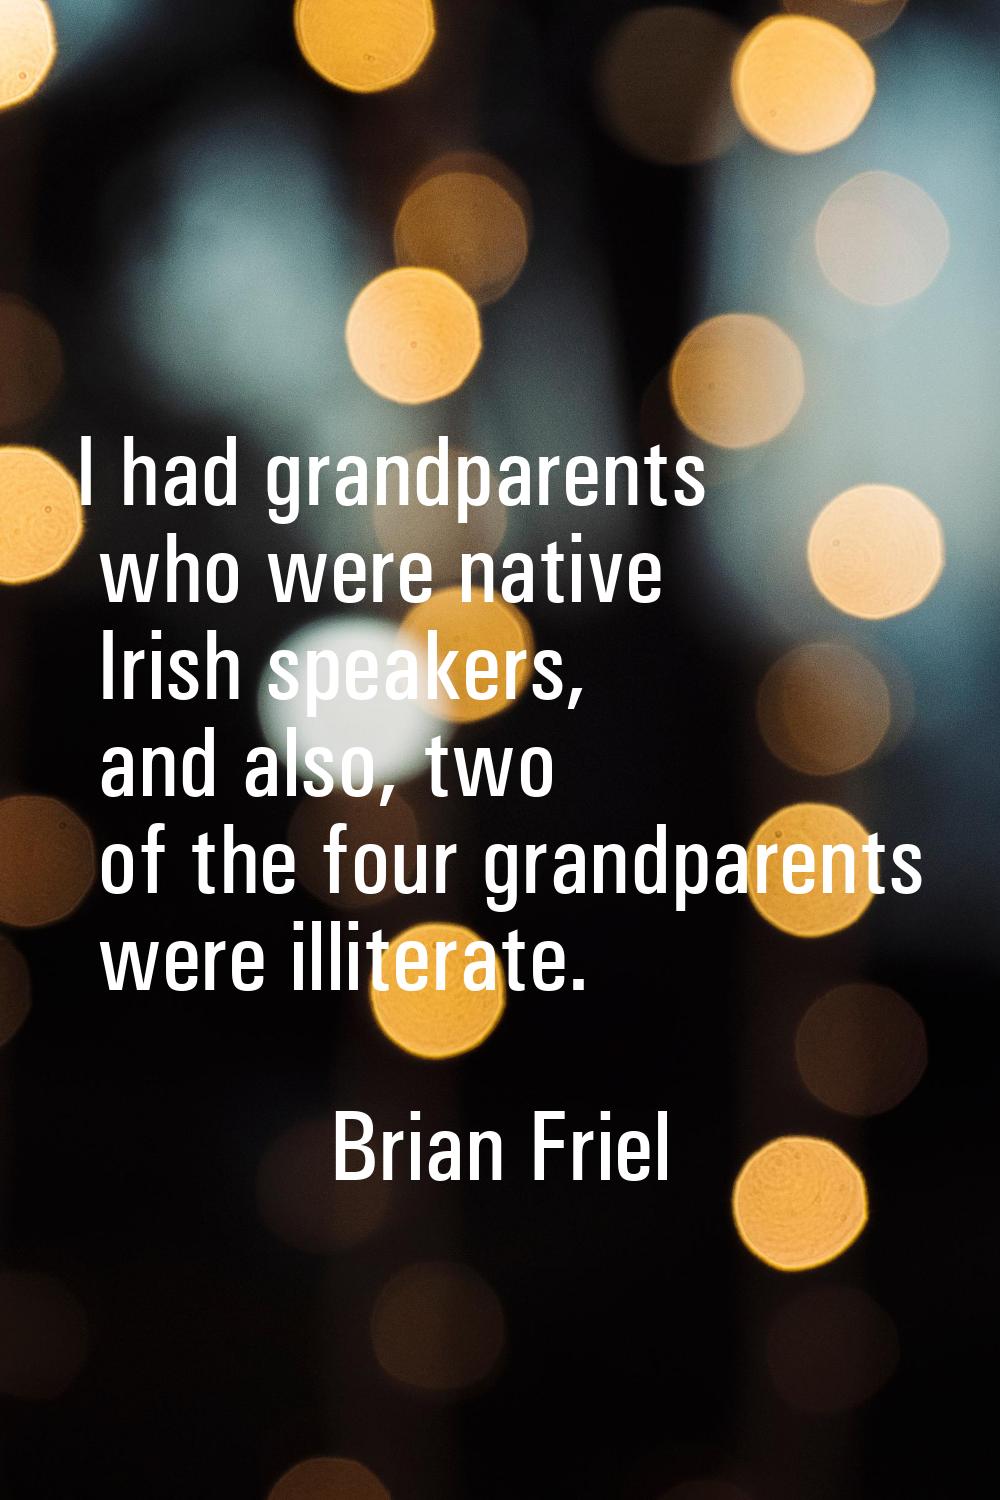 I had grandparents who were native Irish speakers, and also, two of the four grandparents were illi